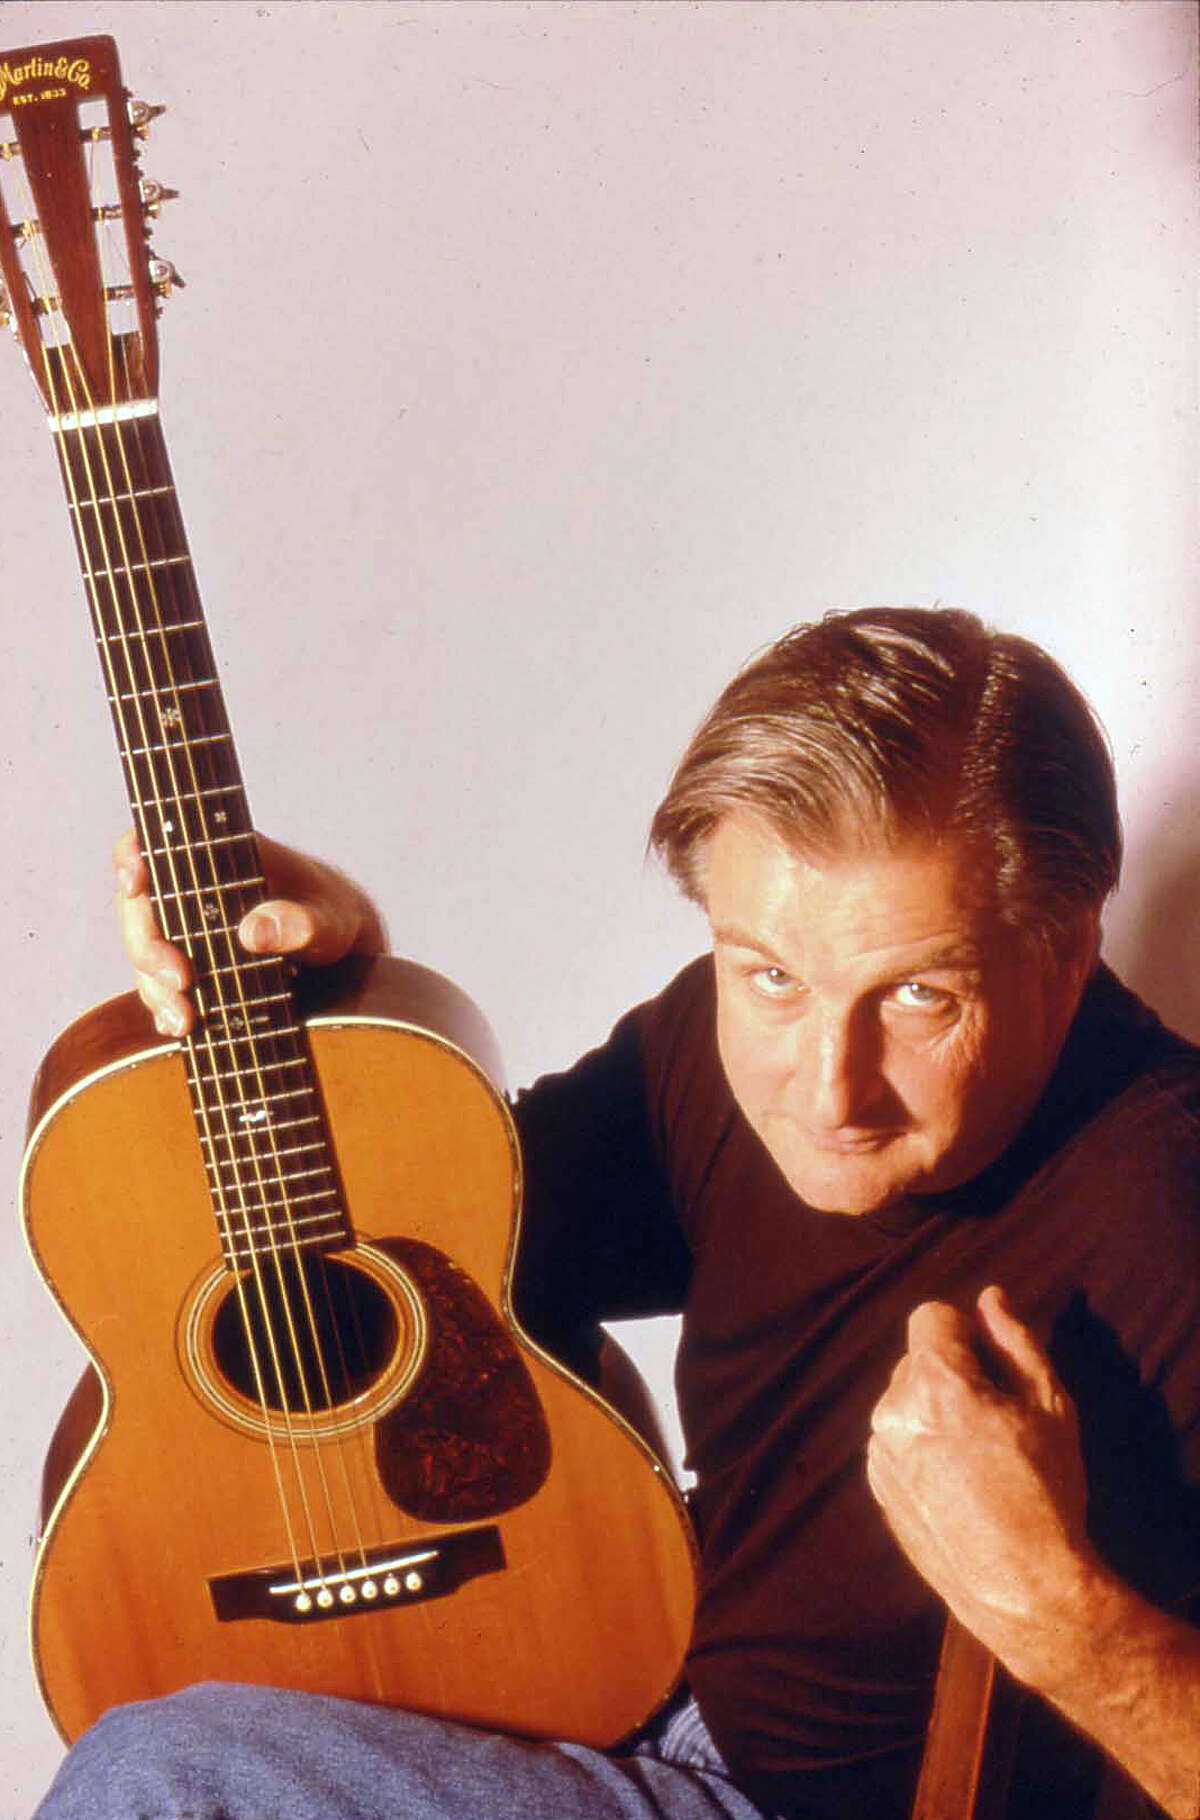 Geoff Muldaur, pictured, took a break from the music scene after fellow musician Paul Butterfield died of an accidental overdose.